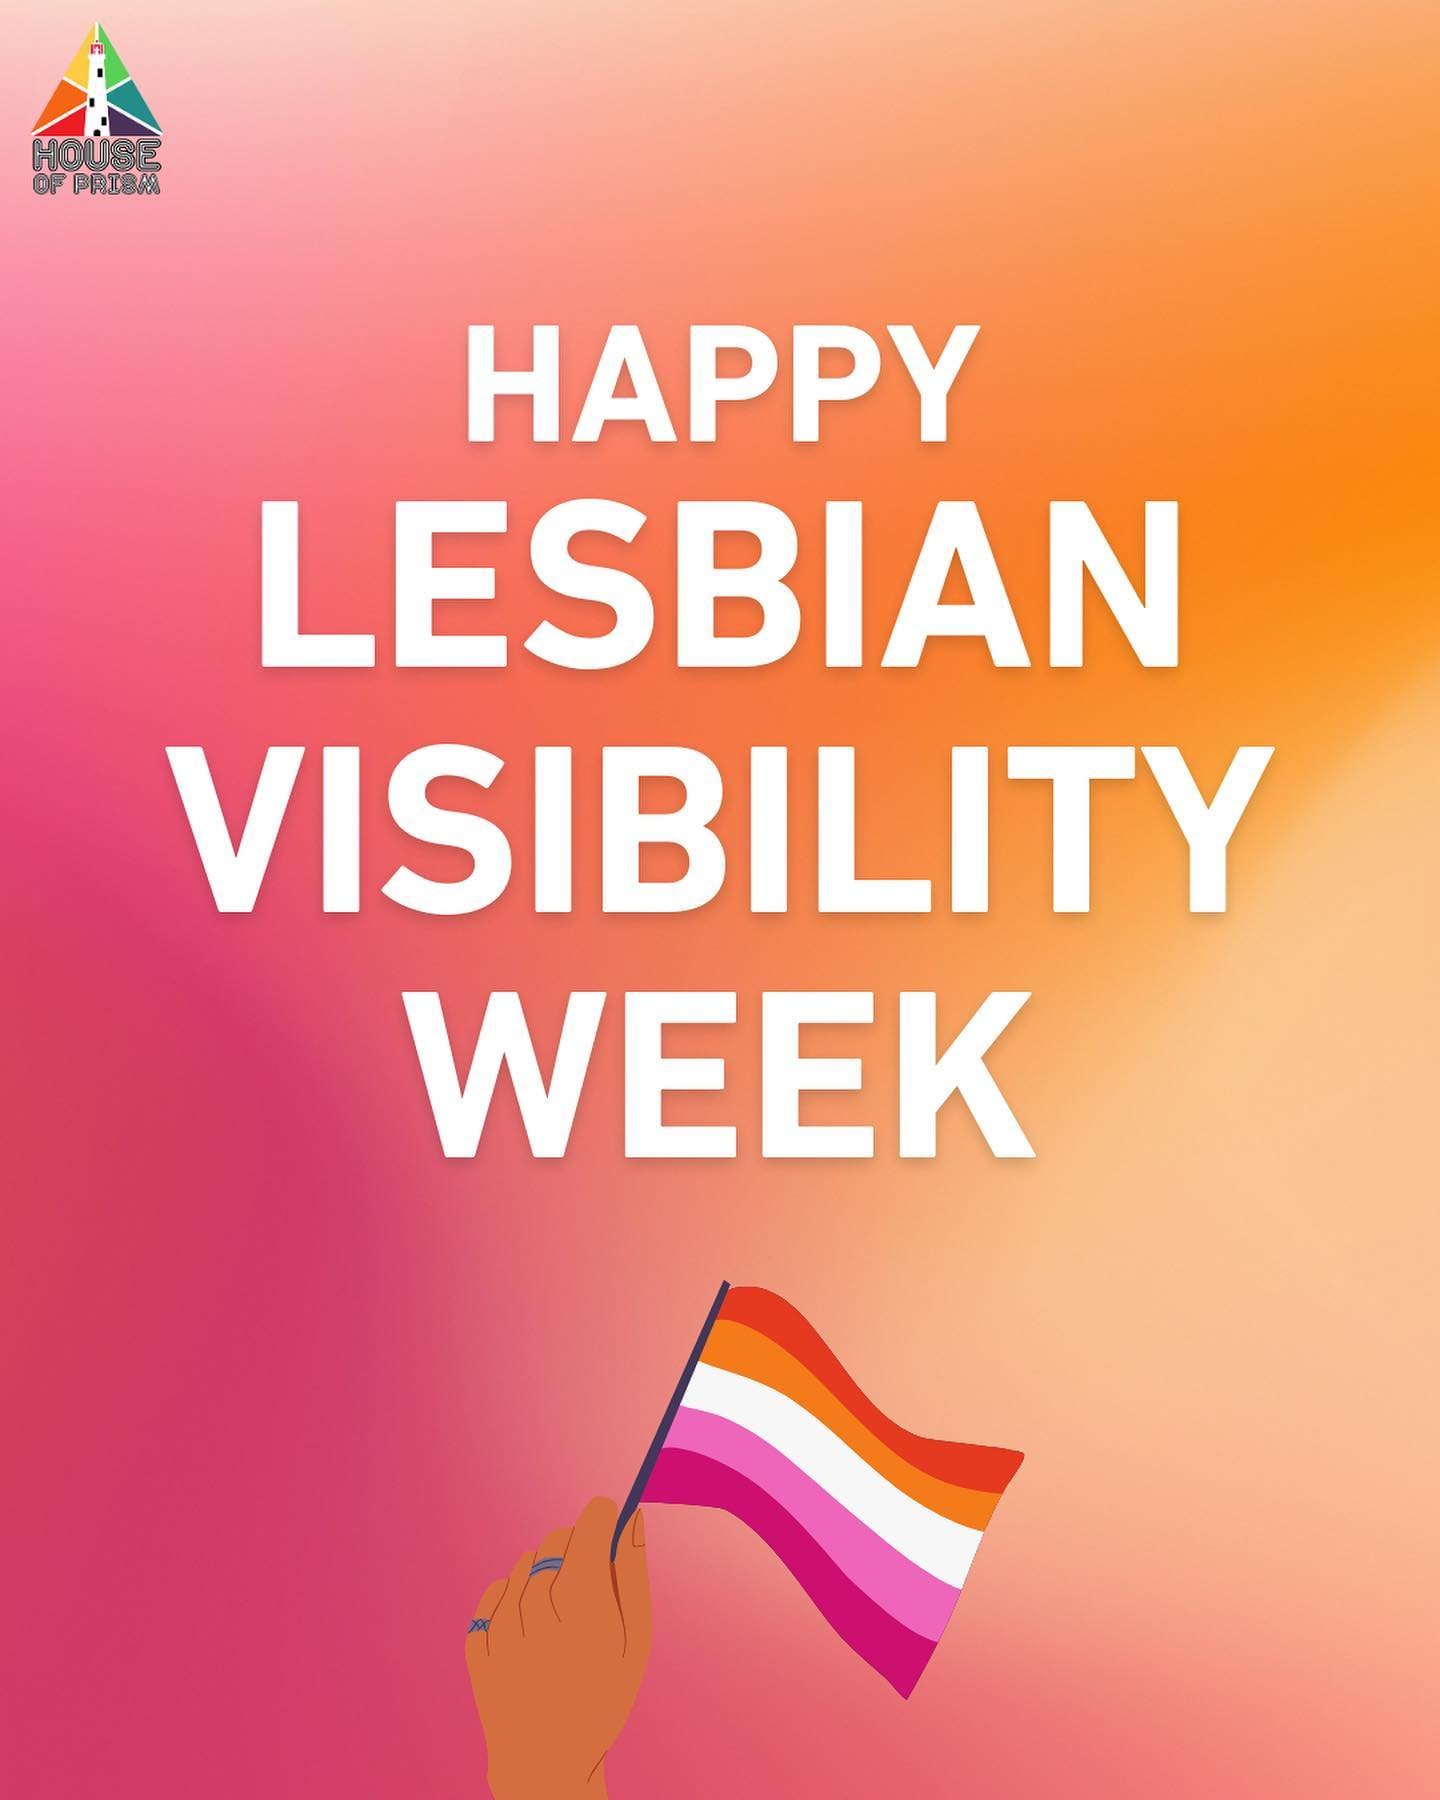 It&rsquo;s Lesbian Visibility Week! To celebrate, let&rsquo;s check out the Lesbian Home Movie Project. It&rsquo;s a film archive with the aim of collecting and preserving film and video of lesbians living their lives. 

The collection includes video